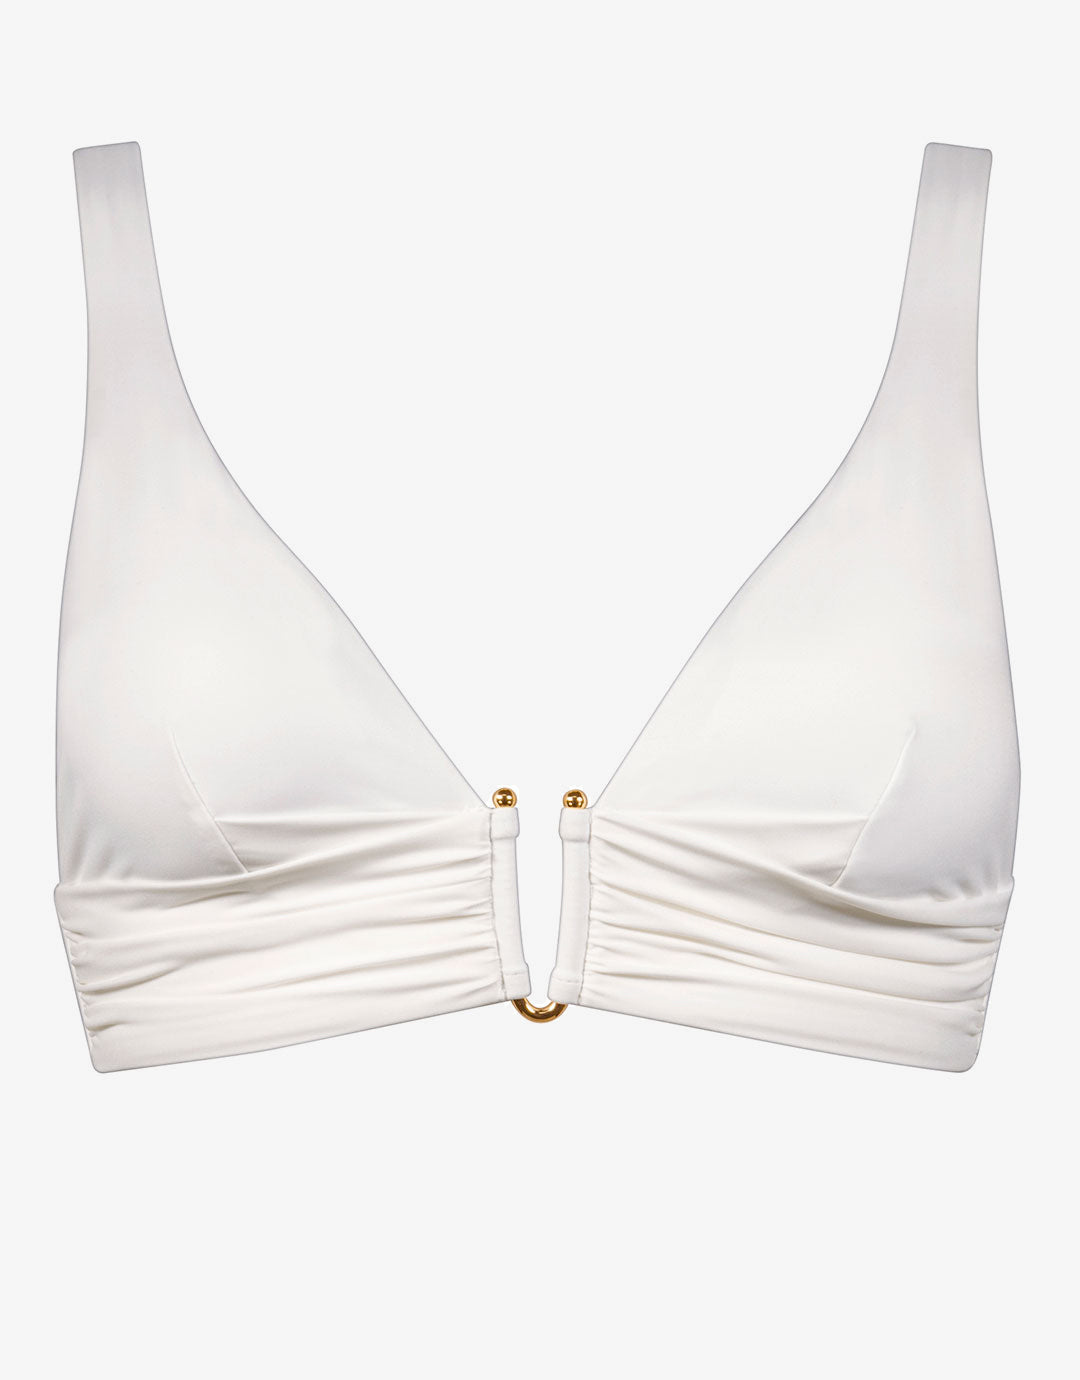 The White Collection Banded Bikini Top - Natural White - Simply Beach UK